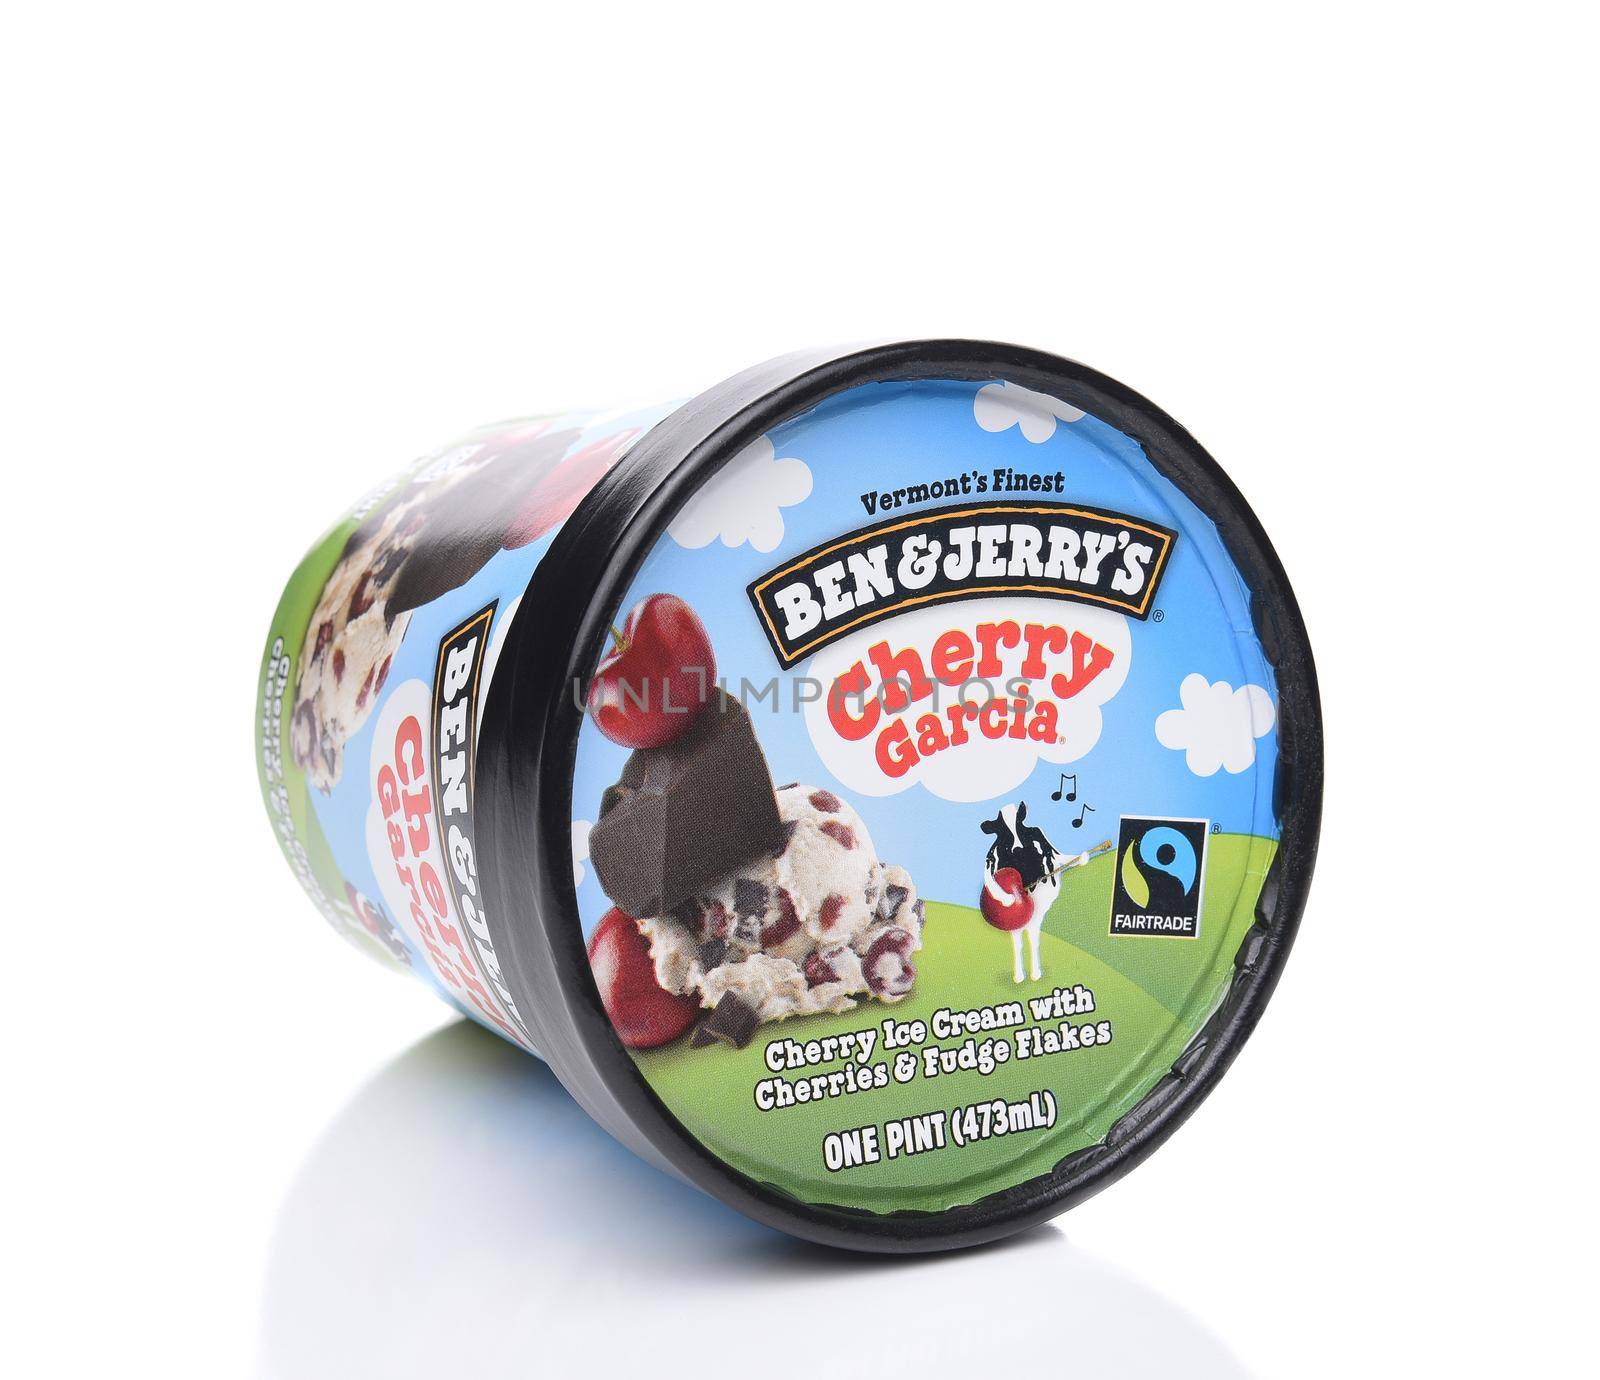 IRVINE, CA - MAY 29, 2017: Cherry Garcia Ice Cream. Ben and Jerrys tribute flavor to the rock legend Jerry Garcia of the Grateful Dead.